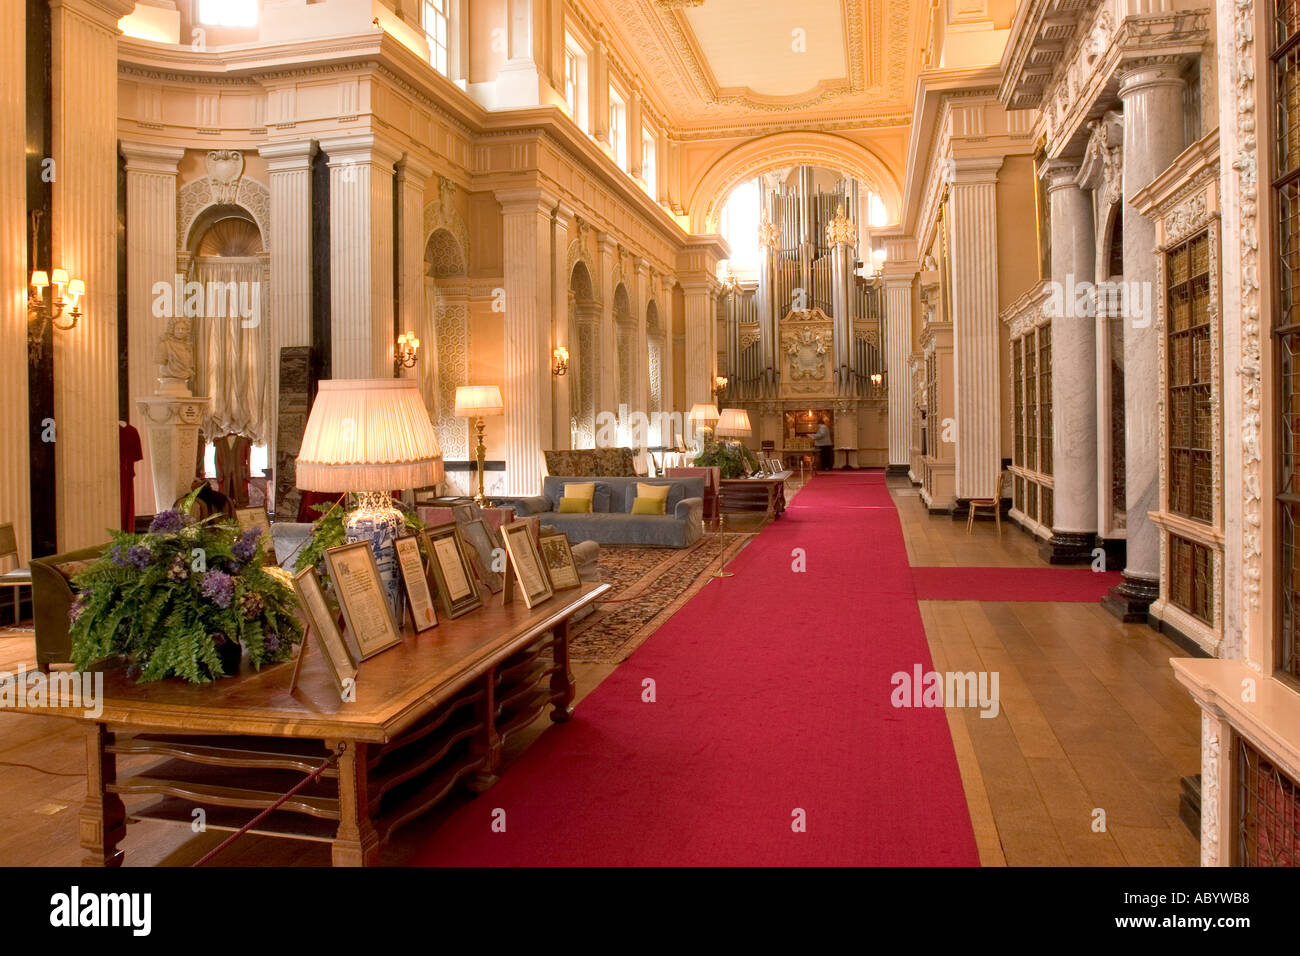 England Oxfordshire Woodstock Blenheim Palace interior Long Library with Willis Organ Stock Photo